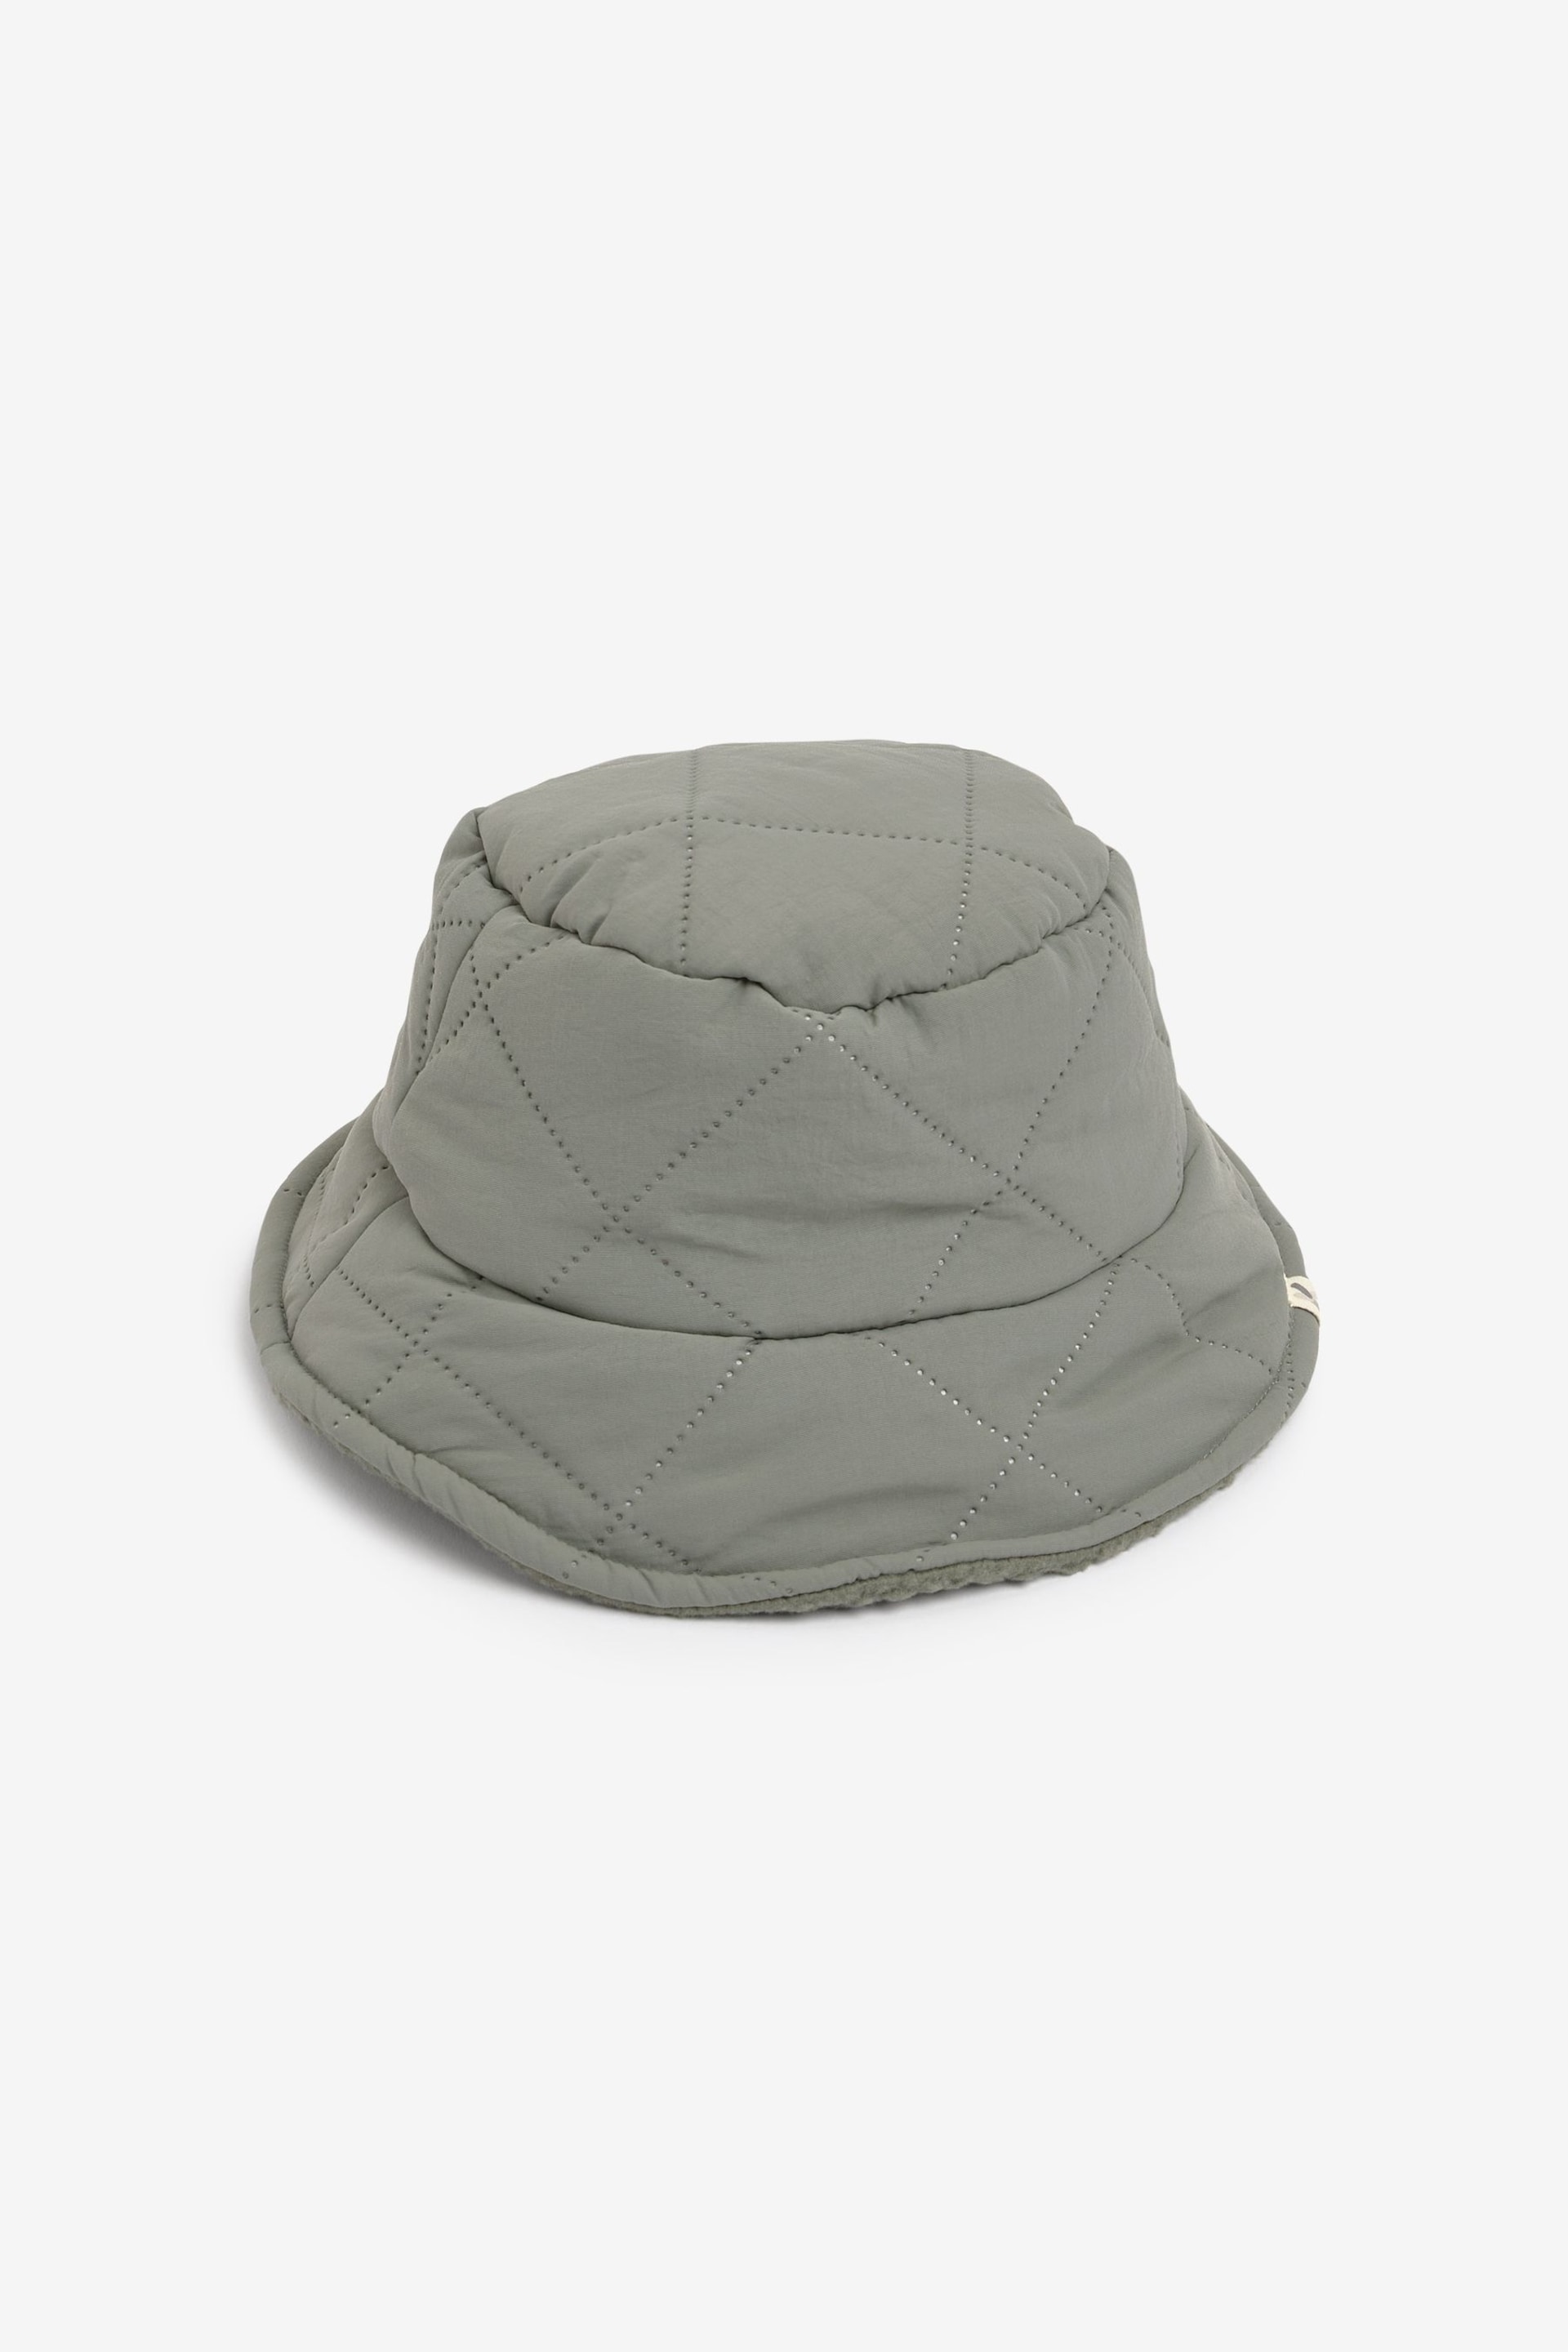 KIDLY Quilted Bucket Hat - Image 4 of 5